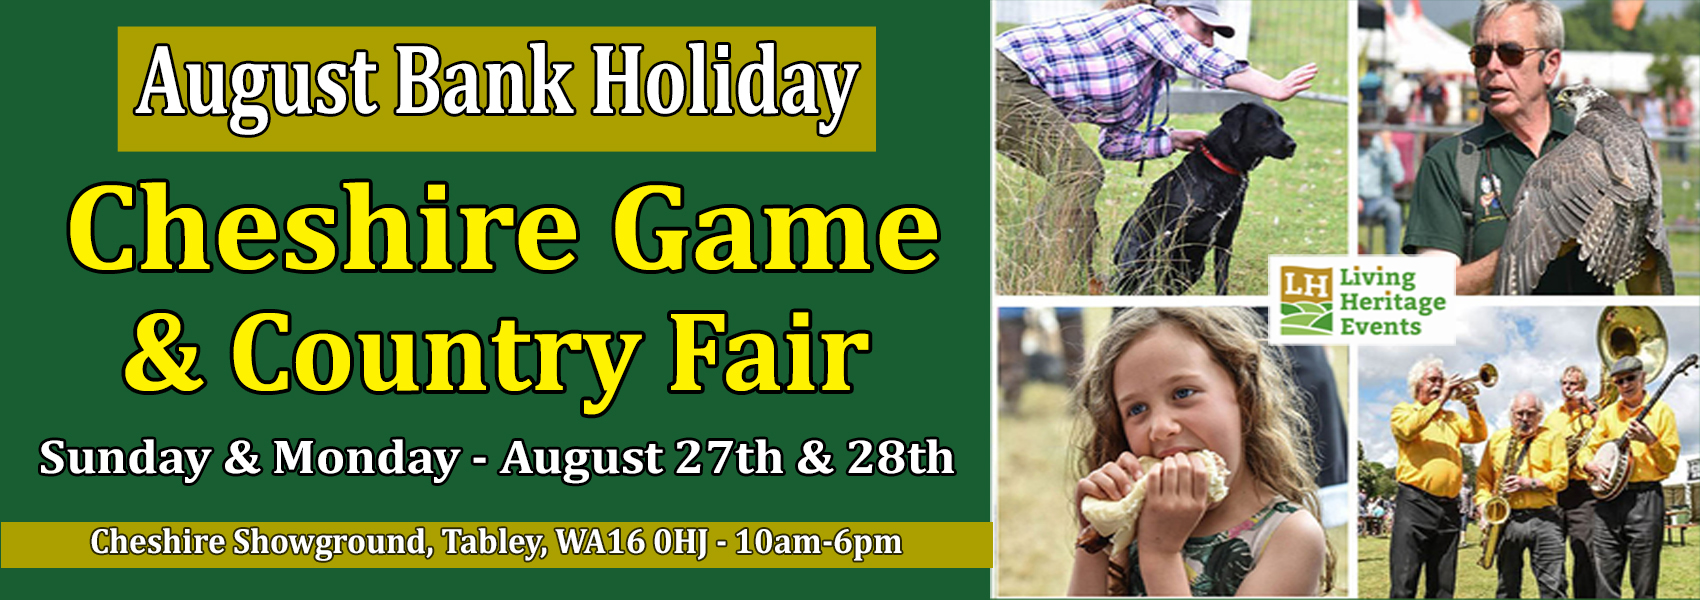 Cheshire Game & Country Fair